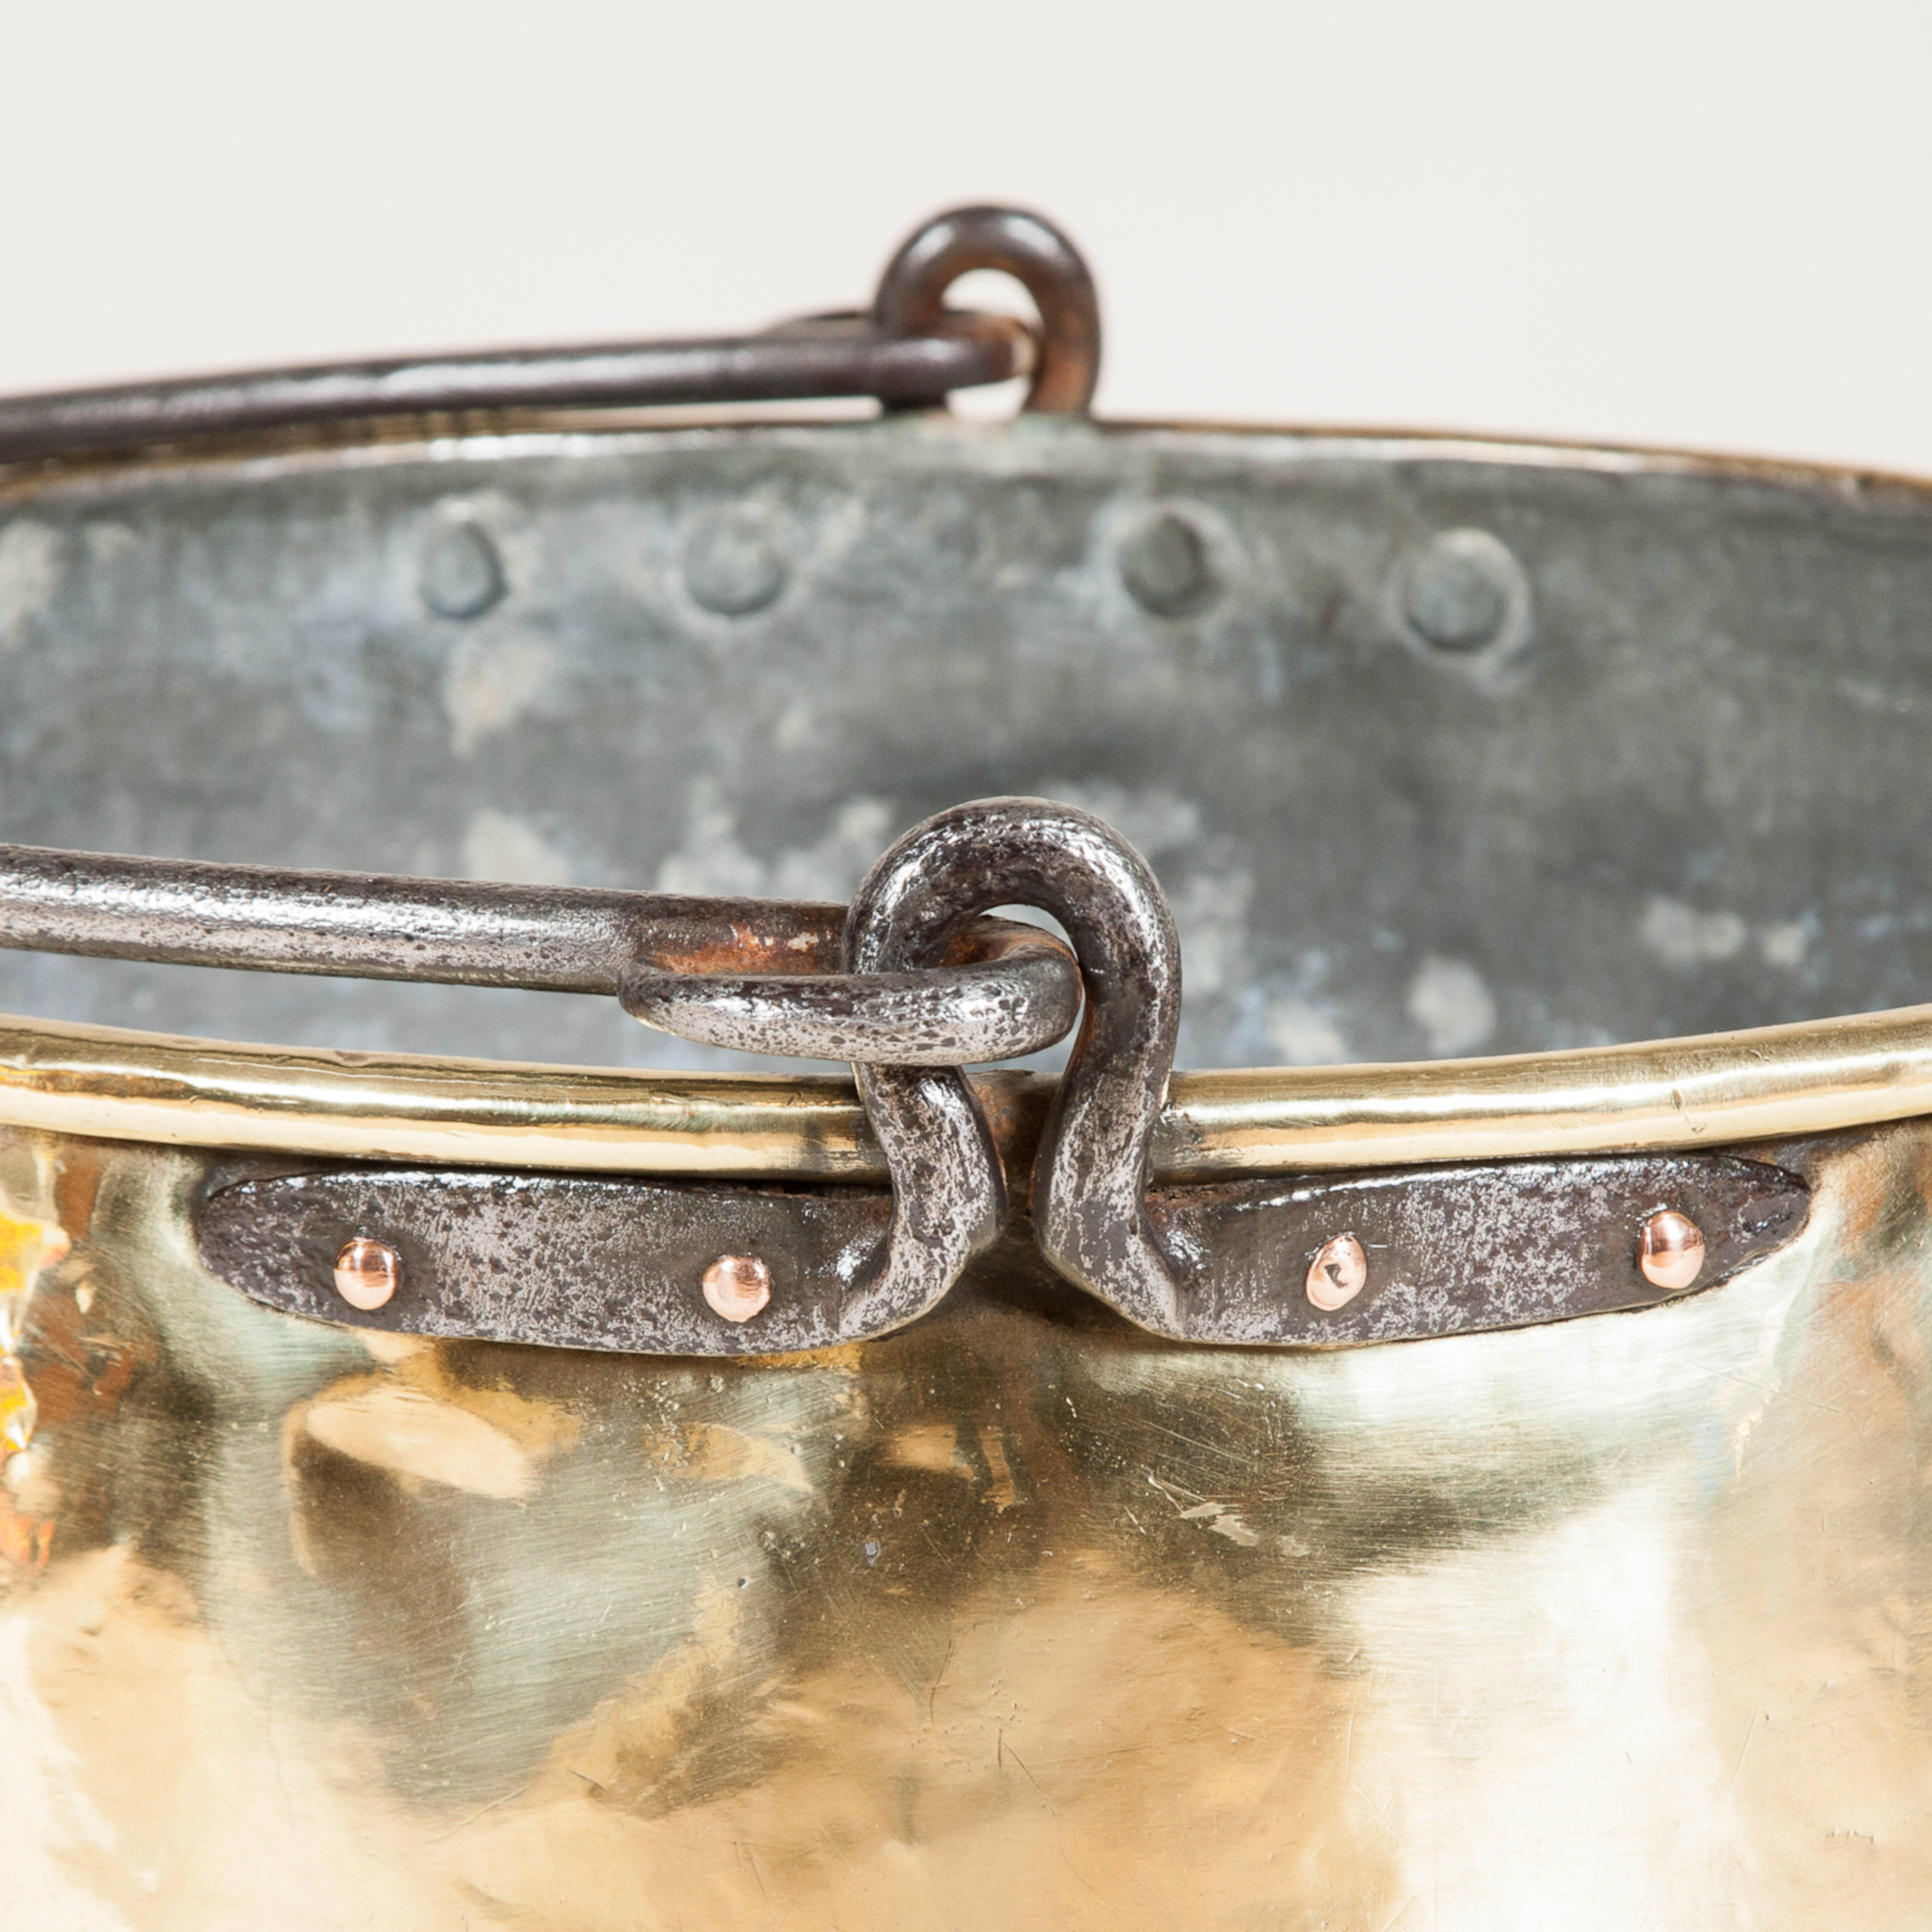 A group of two 19th century large brass pots with iron handles and copper rivets.

The below dimension is for the two pots stacked for shipping.